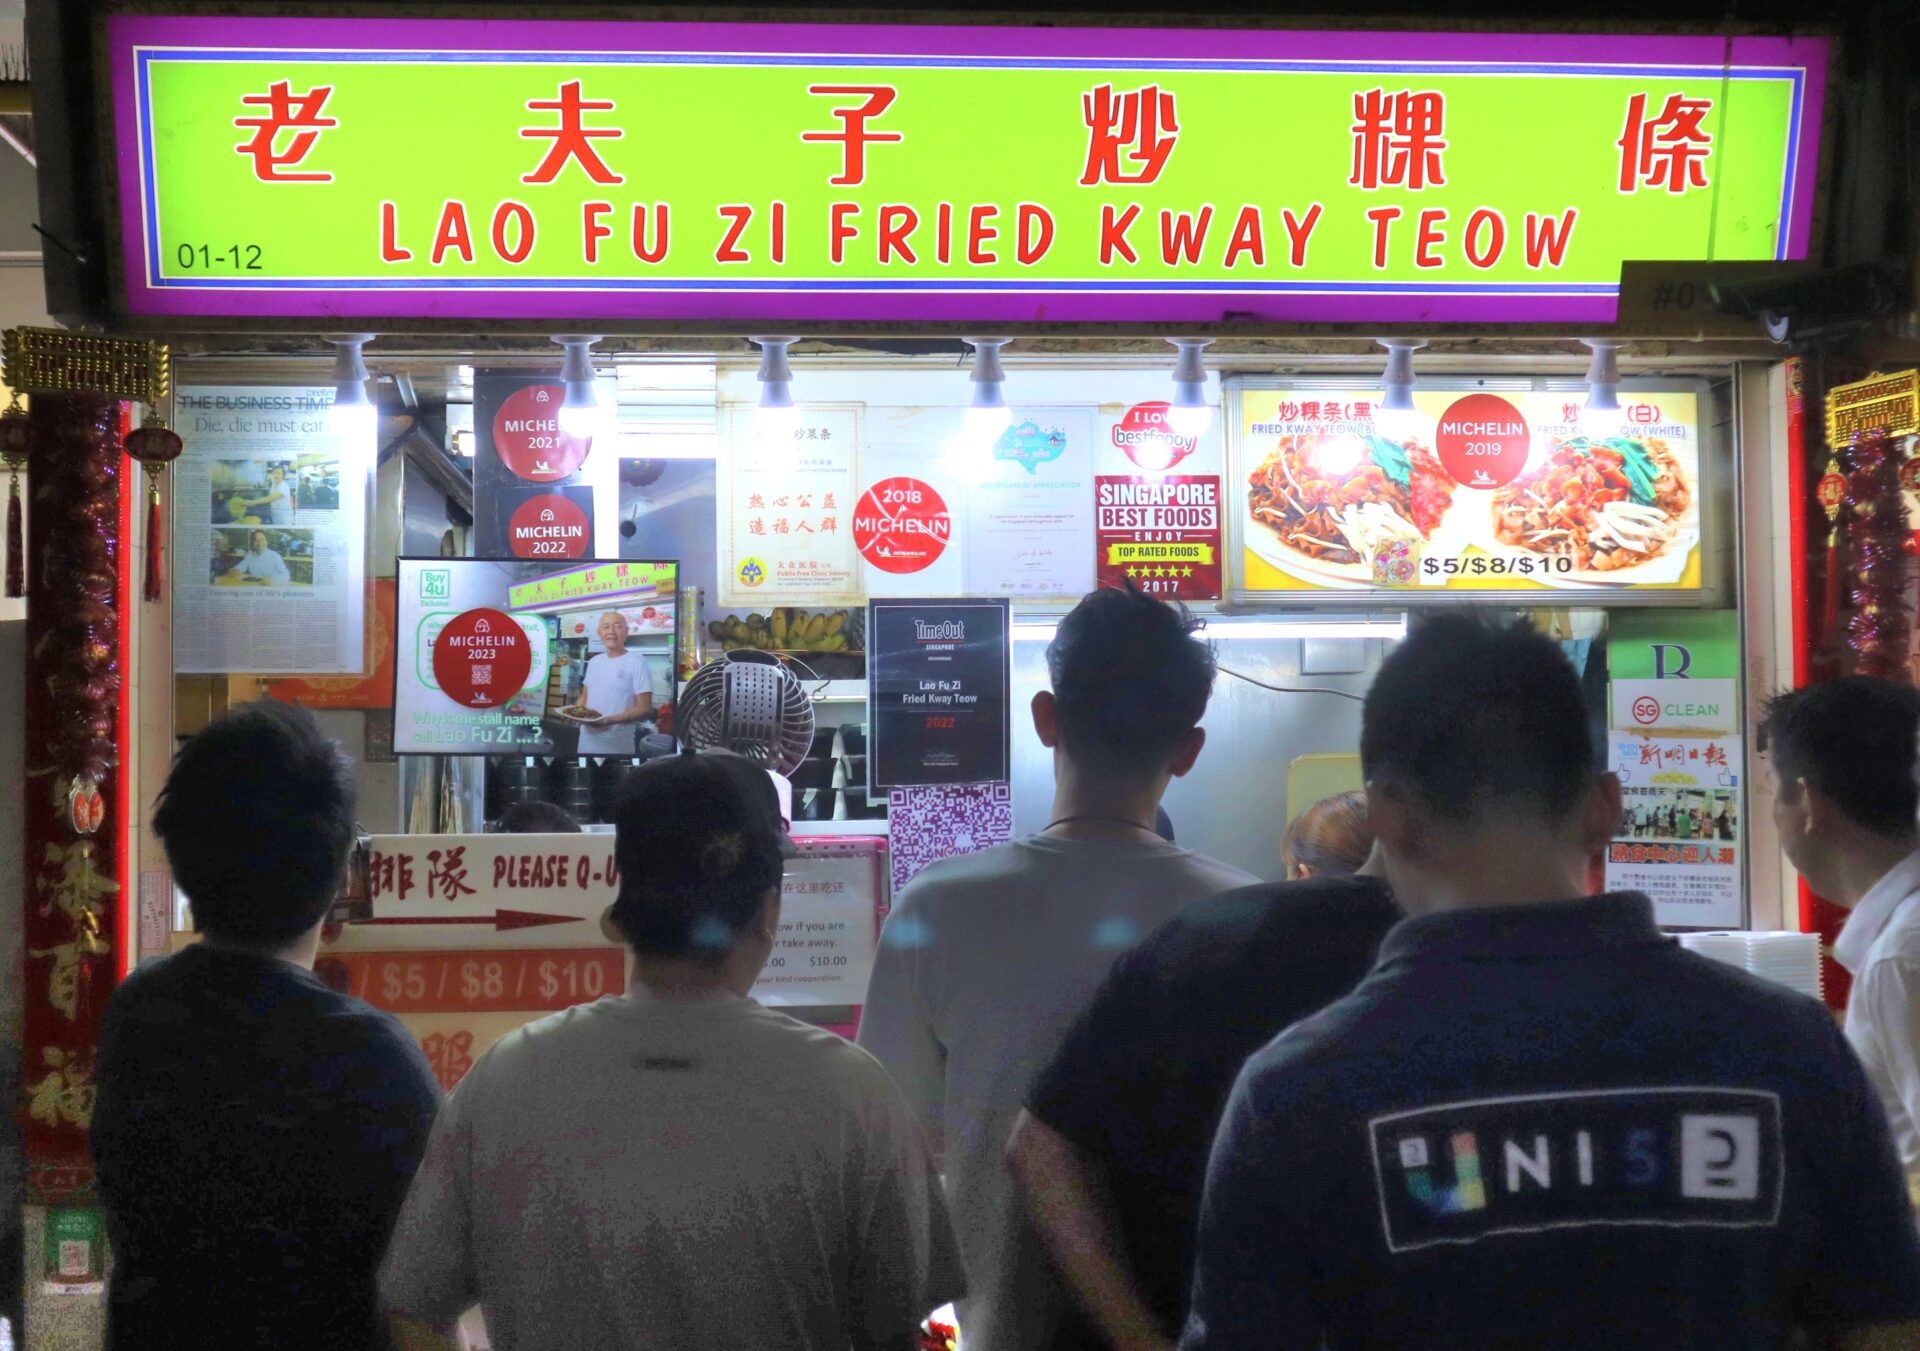 Old Airport Road Food Centre - lao fu zi fried kway teow stall